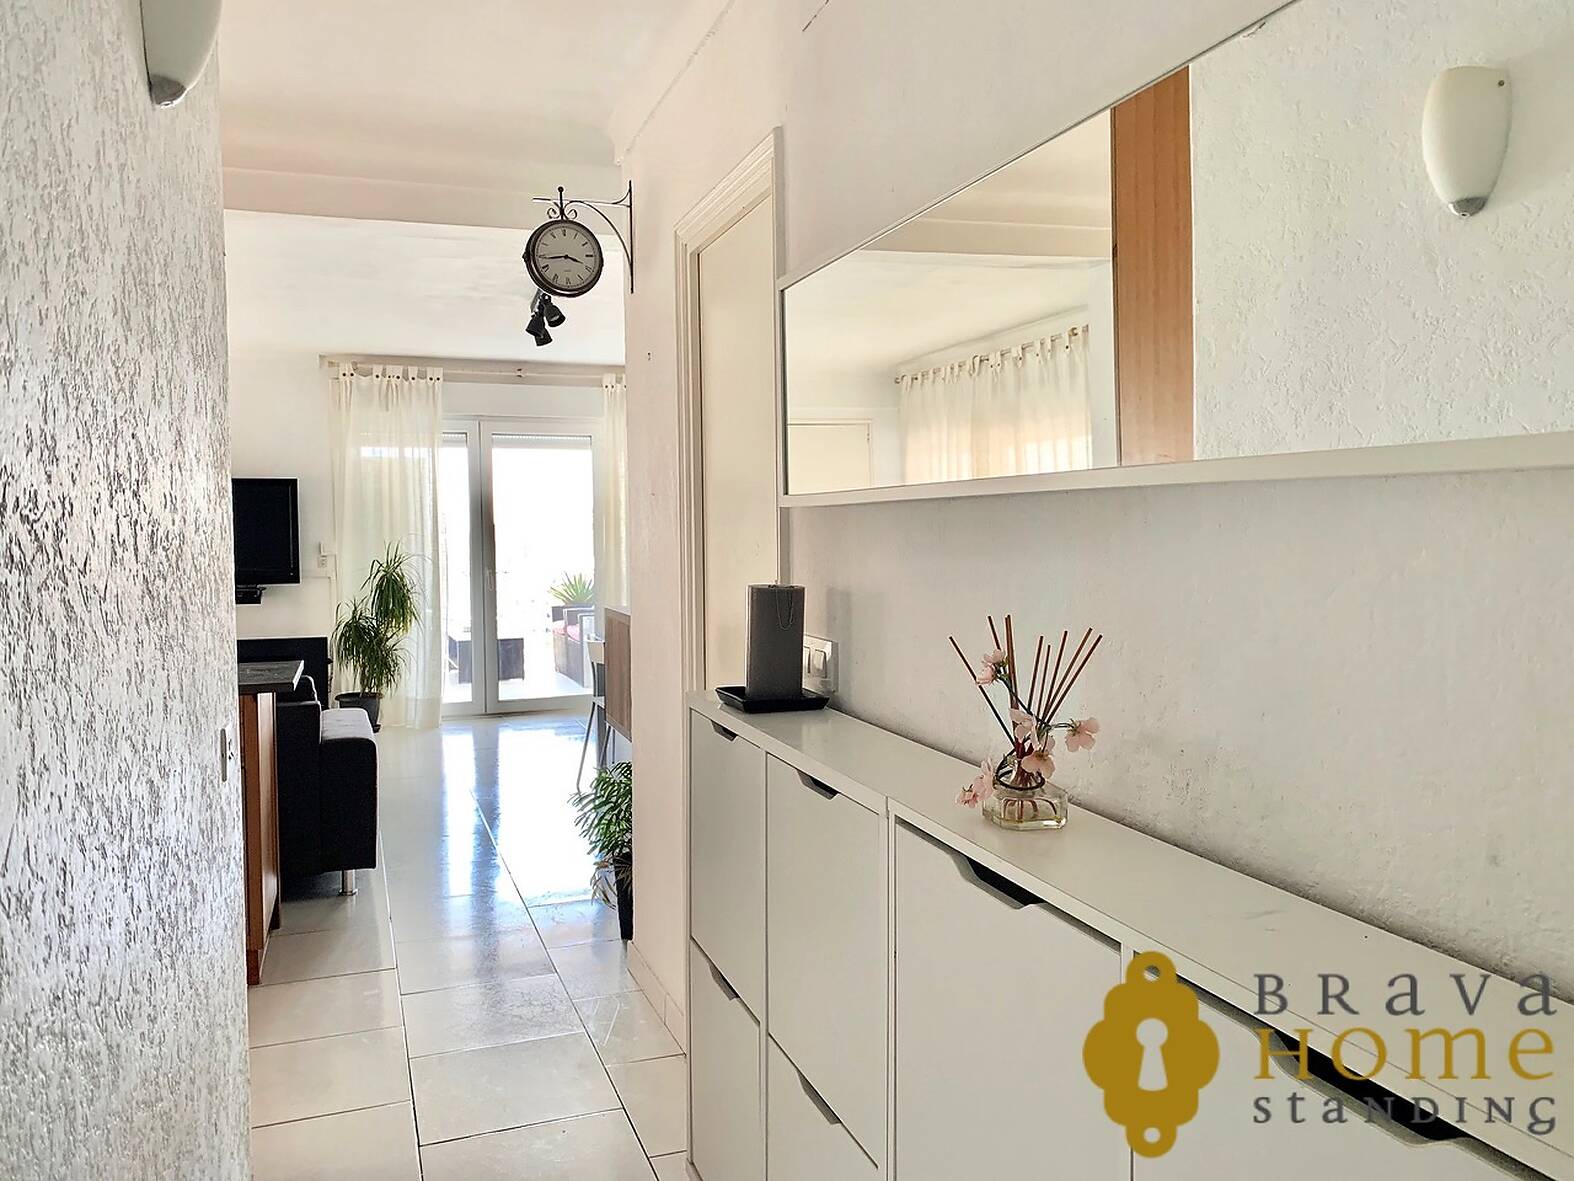 Splendid apartment overlooking the harbor and sea for sale in Empuriabrava